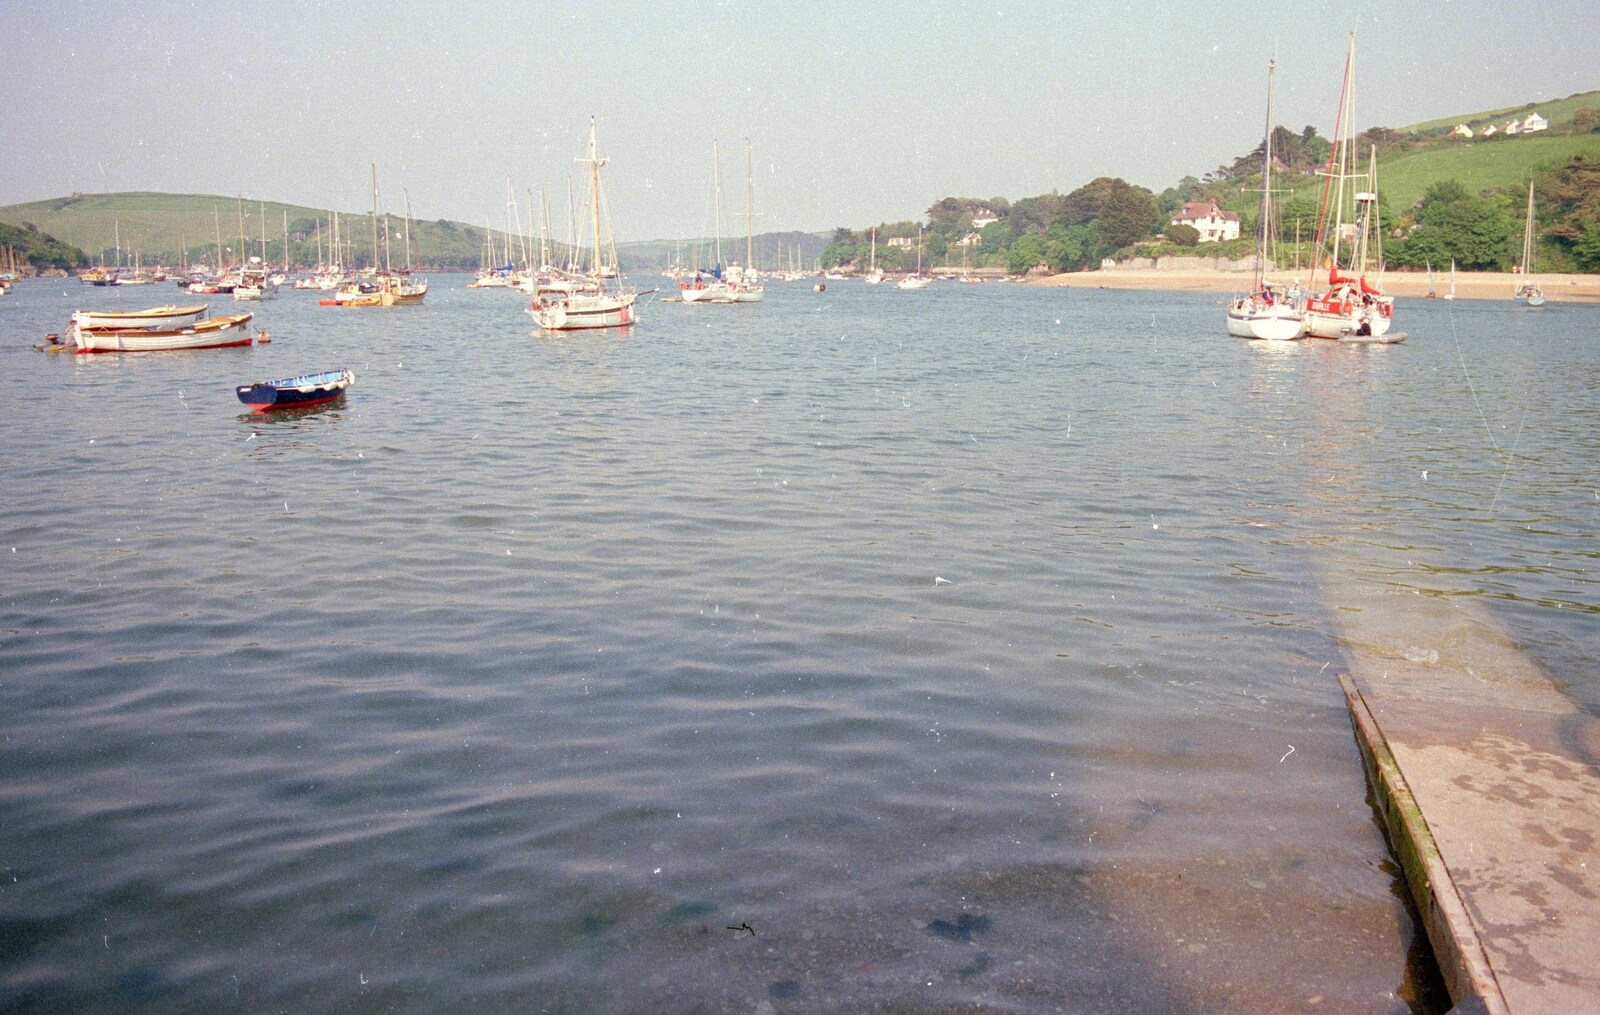 Looking up the river from Uni: Twenty One Guns and Footie on the Beach, Plymouth Hoe and Salcombe, Devon - 15th June 1986